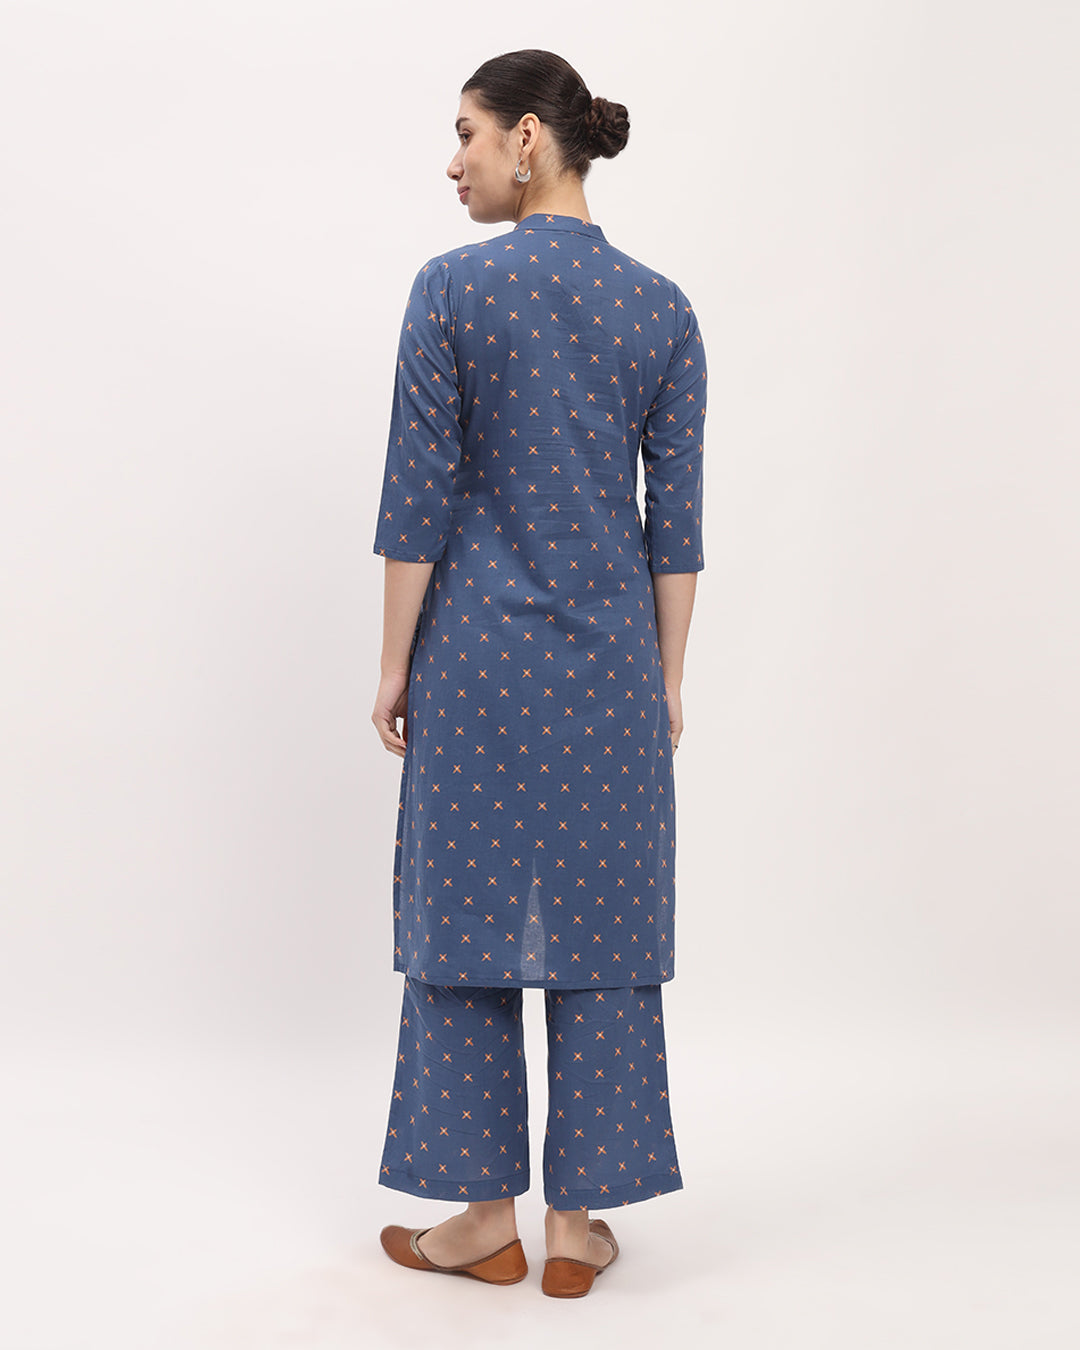 Combo: English Floral Garden & Blue Starry High-Low Printed Kurta (Without Bottoms)